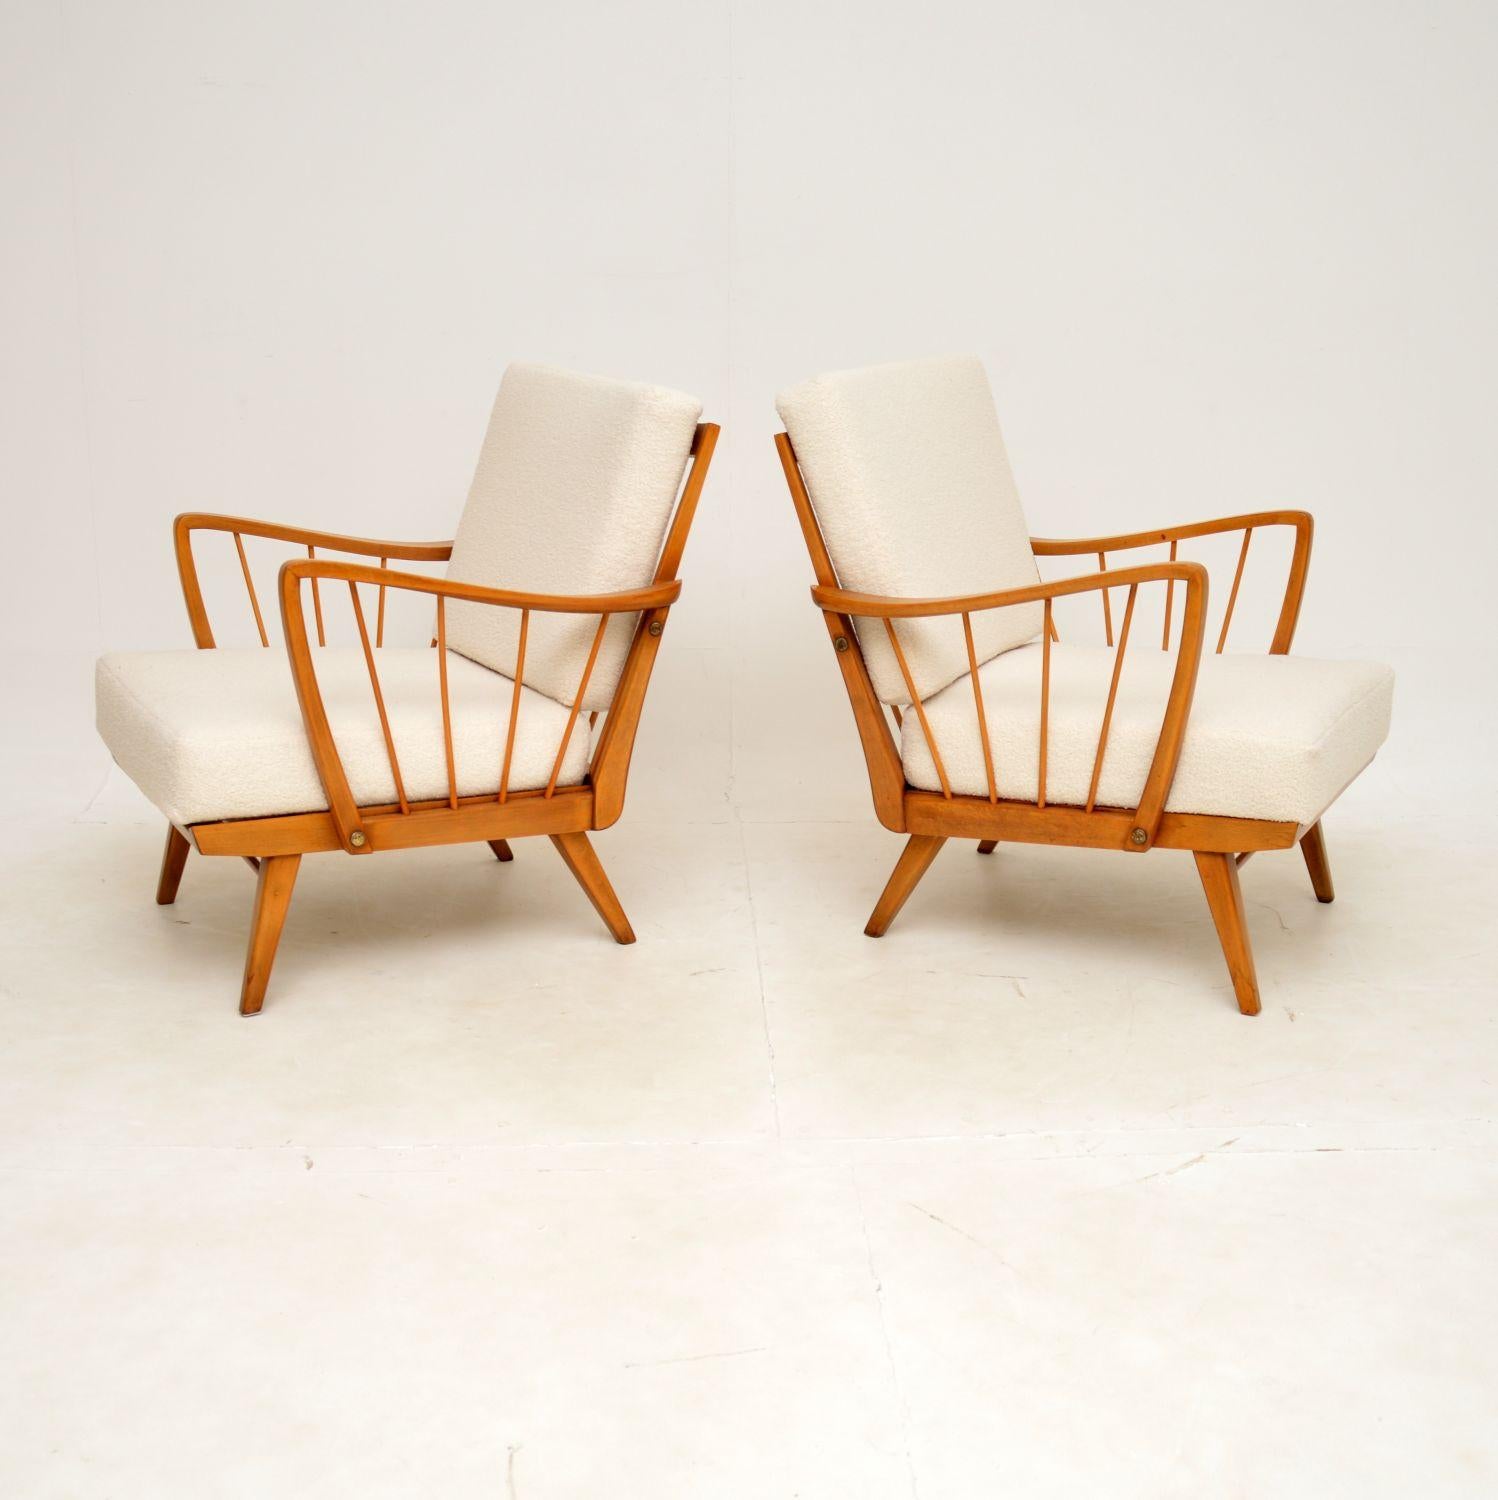 A stylish and very well made pair of vintage French open armchairs in solid birch. They were recently imported from France, and they date from the 1950s-196s.

They are a lovely size, and are very comfortable to relax in. The solid birch frames